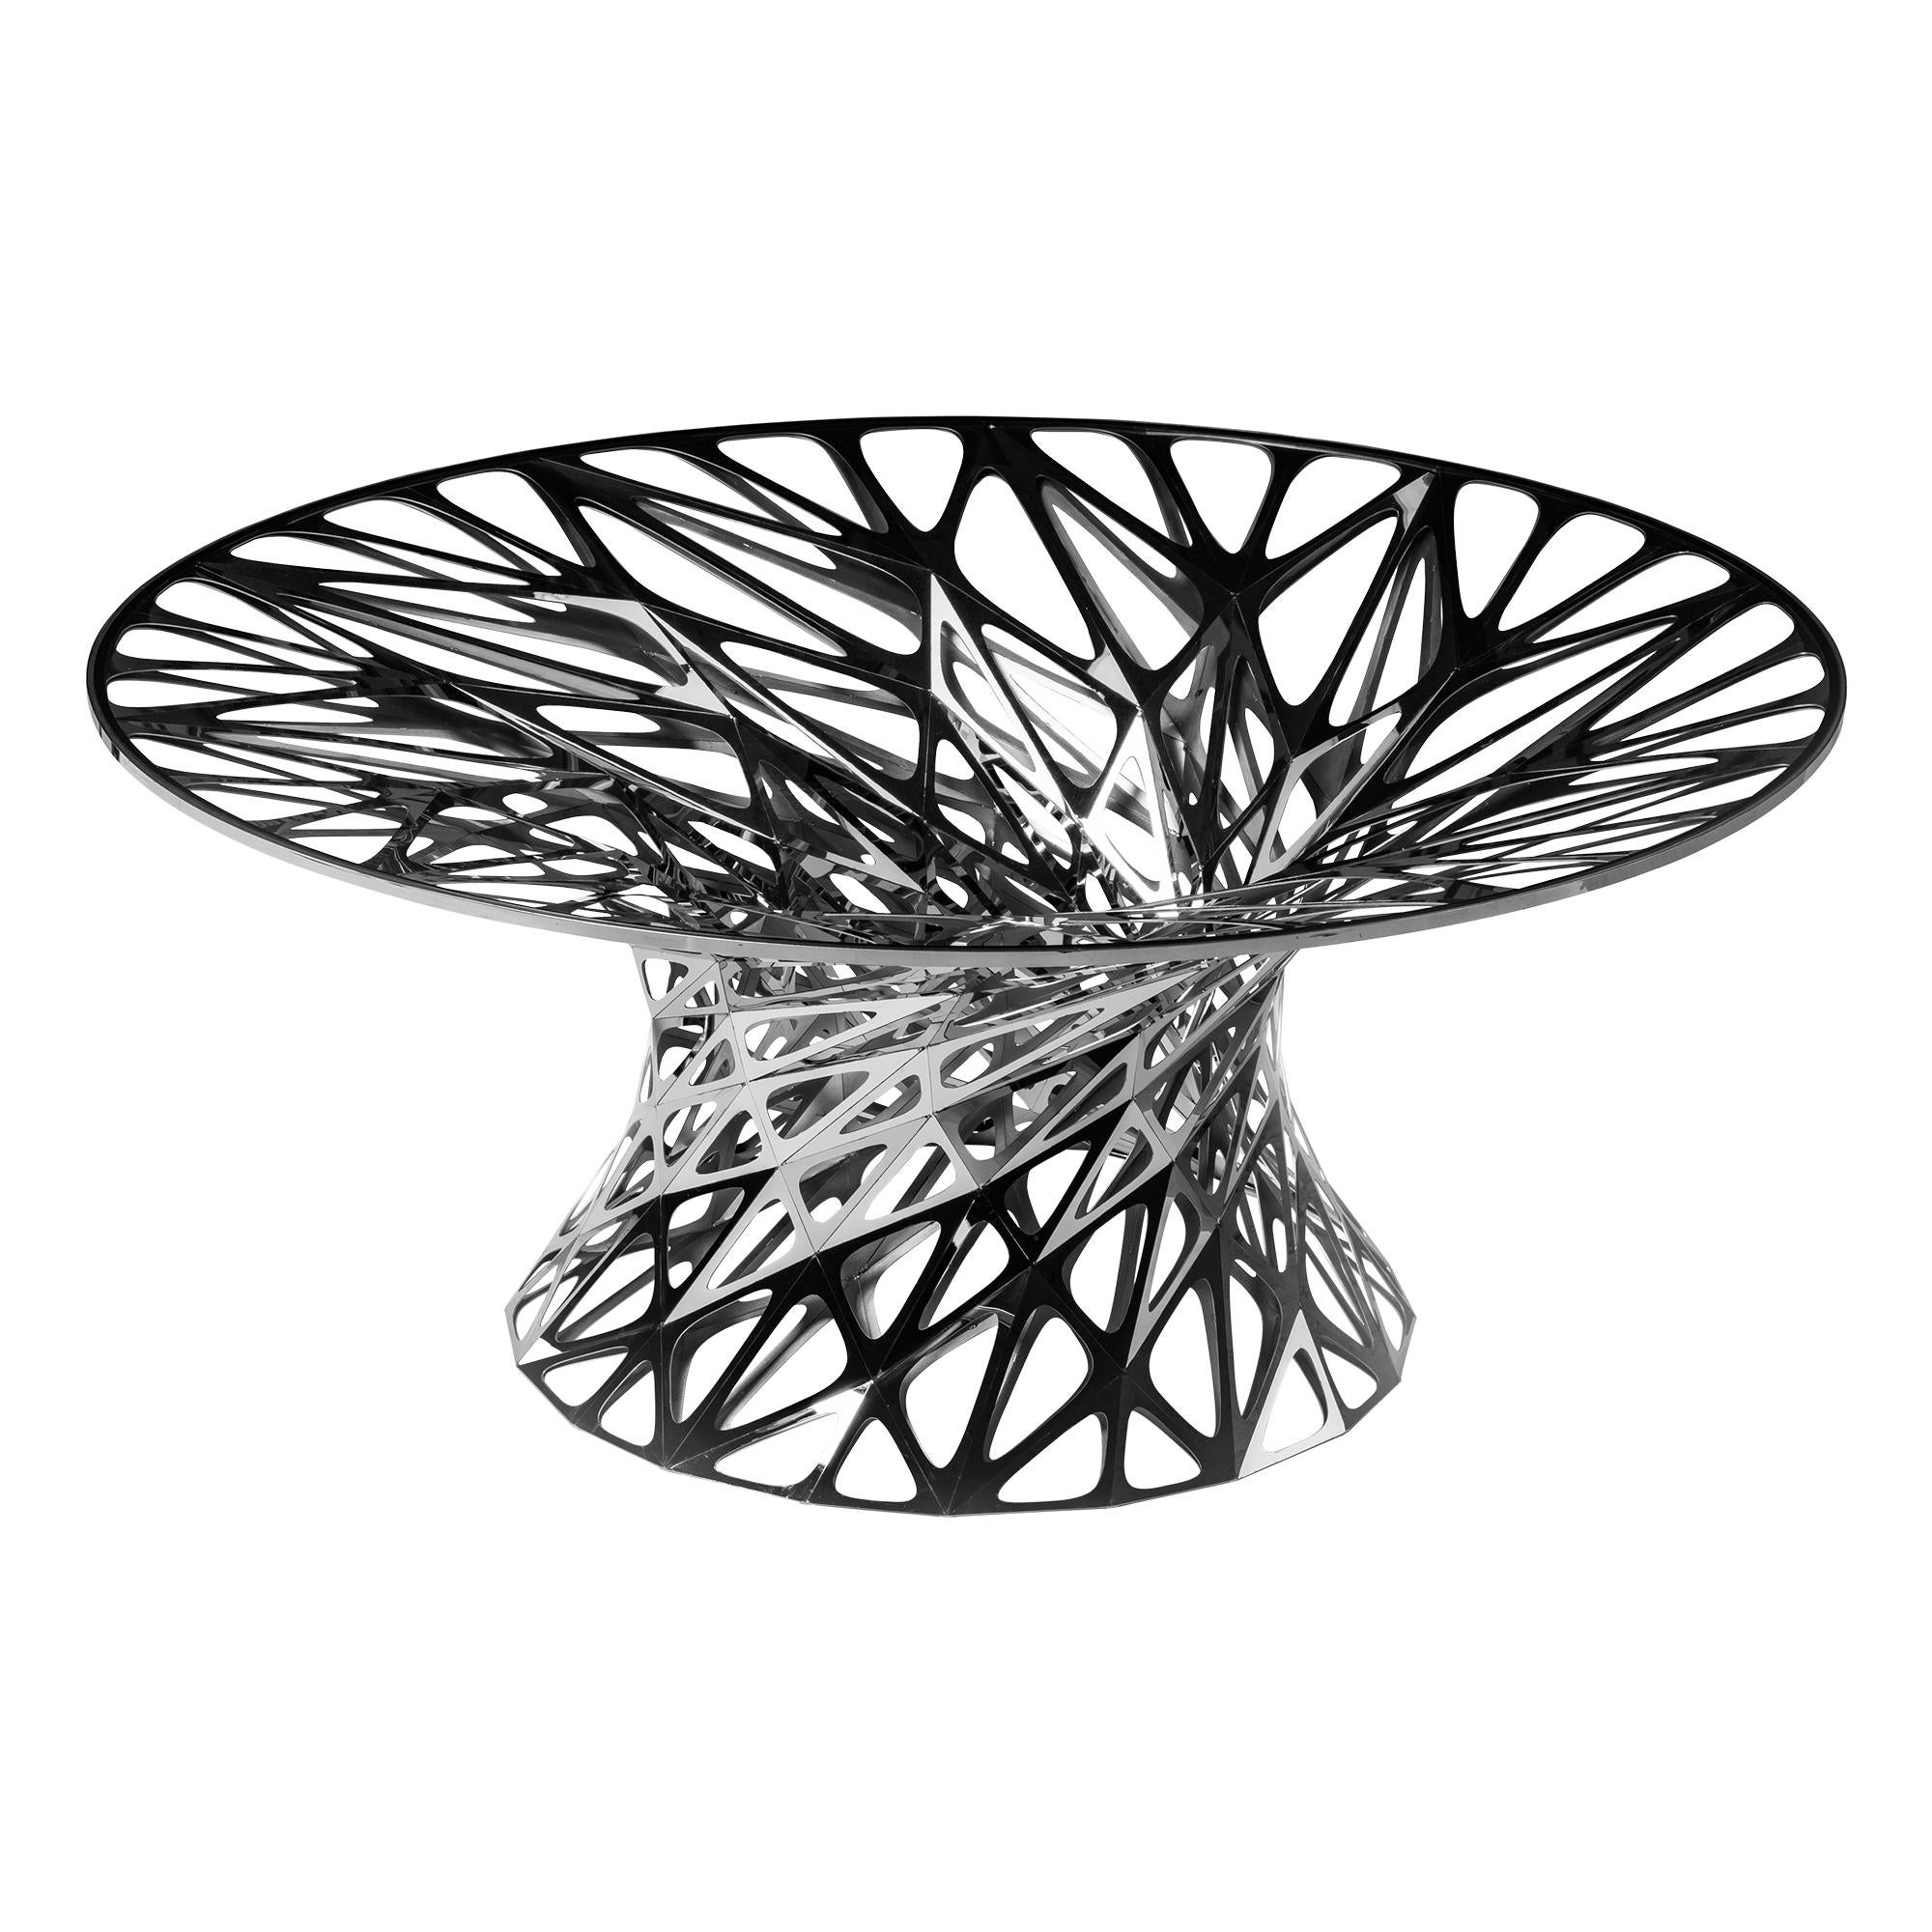 Object #MT-T1-F-L Mirror Polished Stainless Steel Table by Zhoujie Zhang For Sale